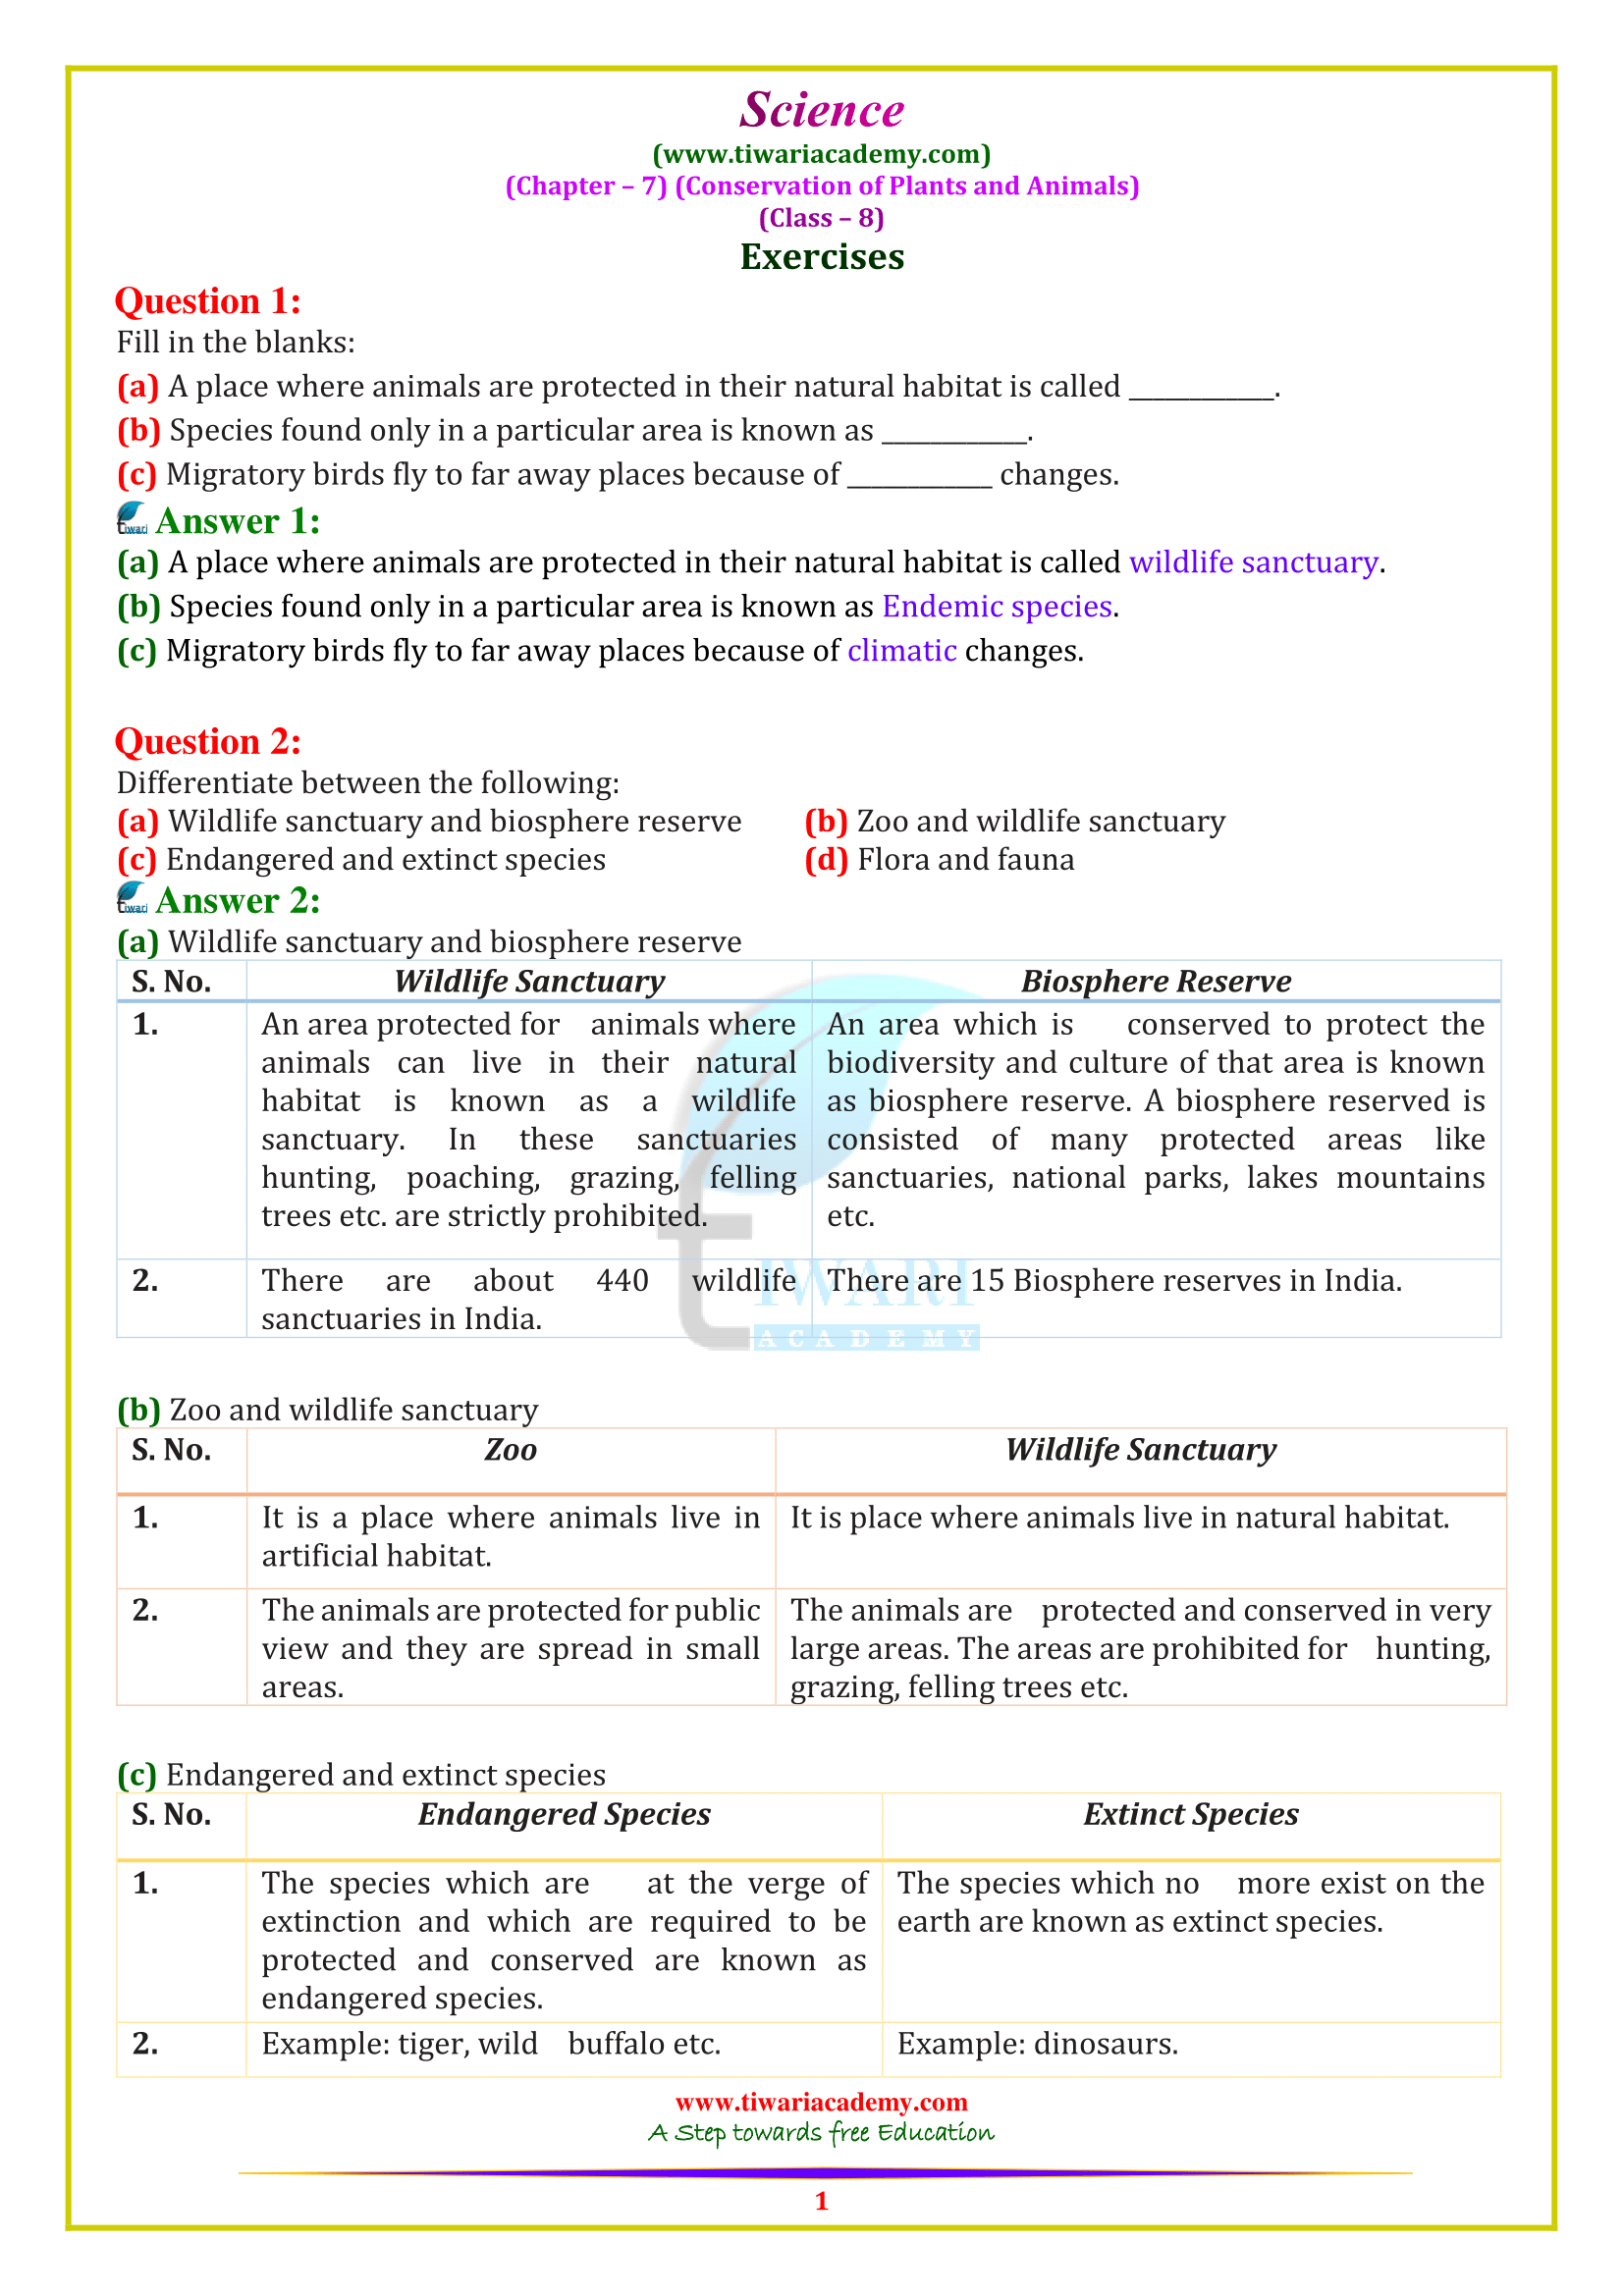 NCERT Solutions for Class 8 Science Chapter 7 English and Hindi Medium